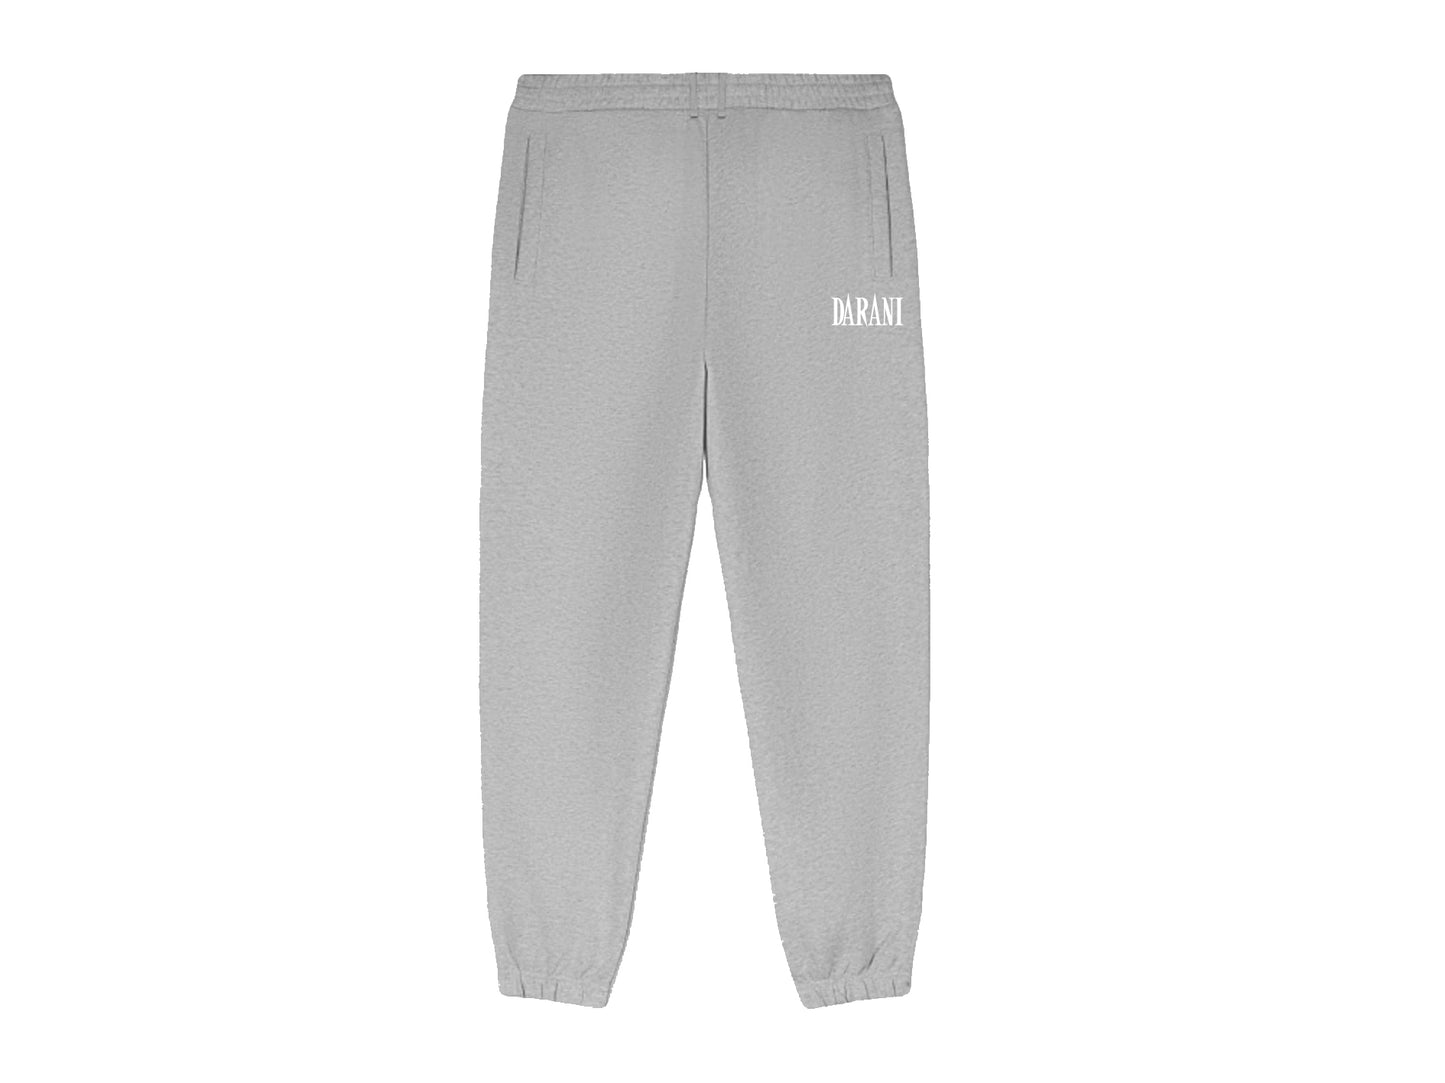 ALL ROUNDER BOTTOMS GREY MARL